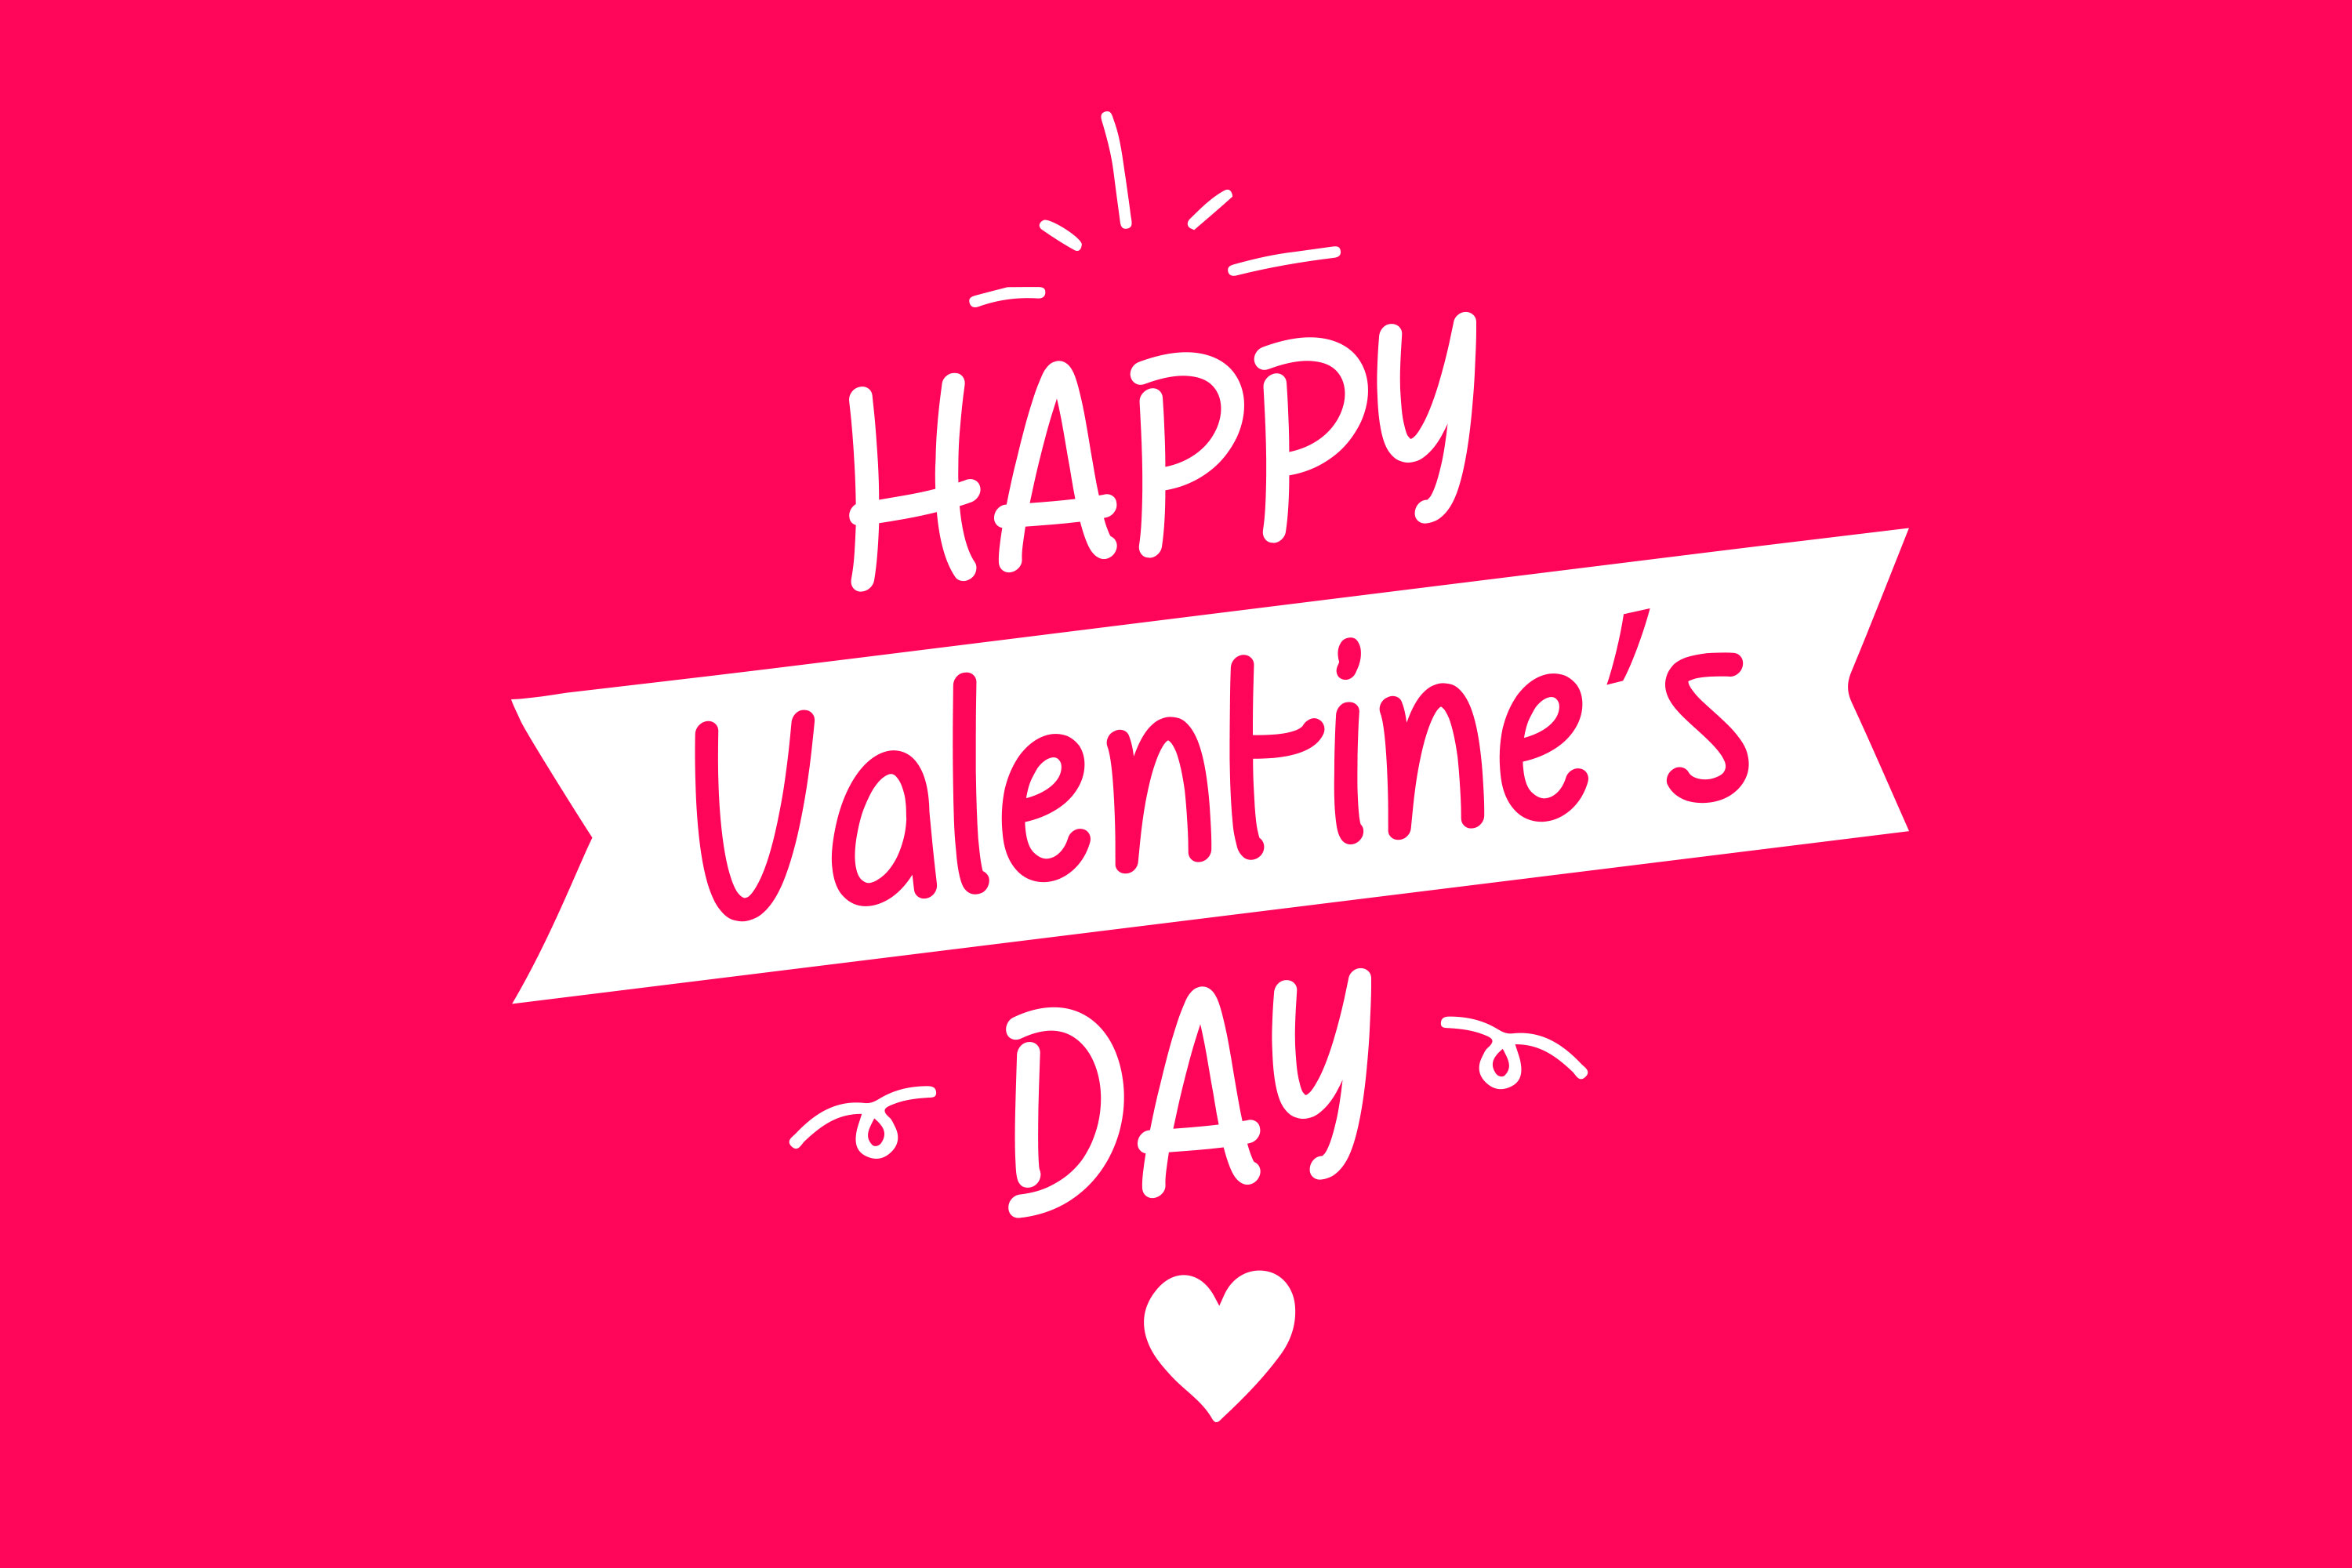 Happy Valentine's Day 2020 HD Pictures, Images, Wallpapers, 4K Photos,  High-Quality Photographs, And Ultra-HD Wallpapers For WhatsApp, Instagram,  Facebook, Messenger, And iMessage